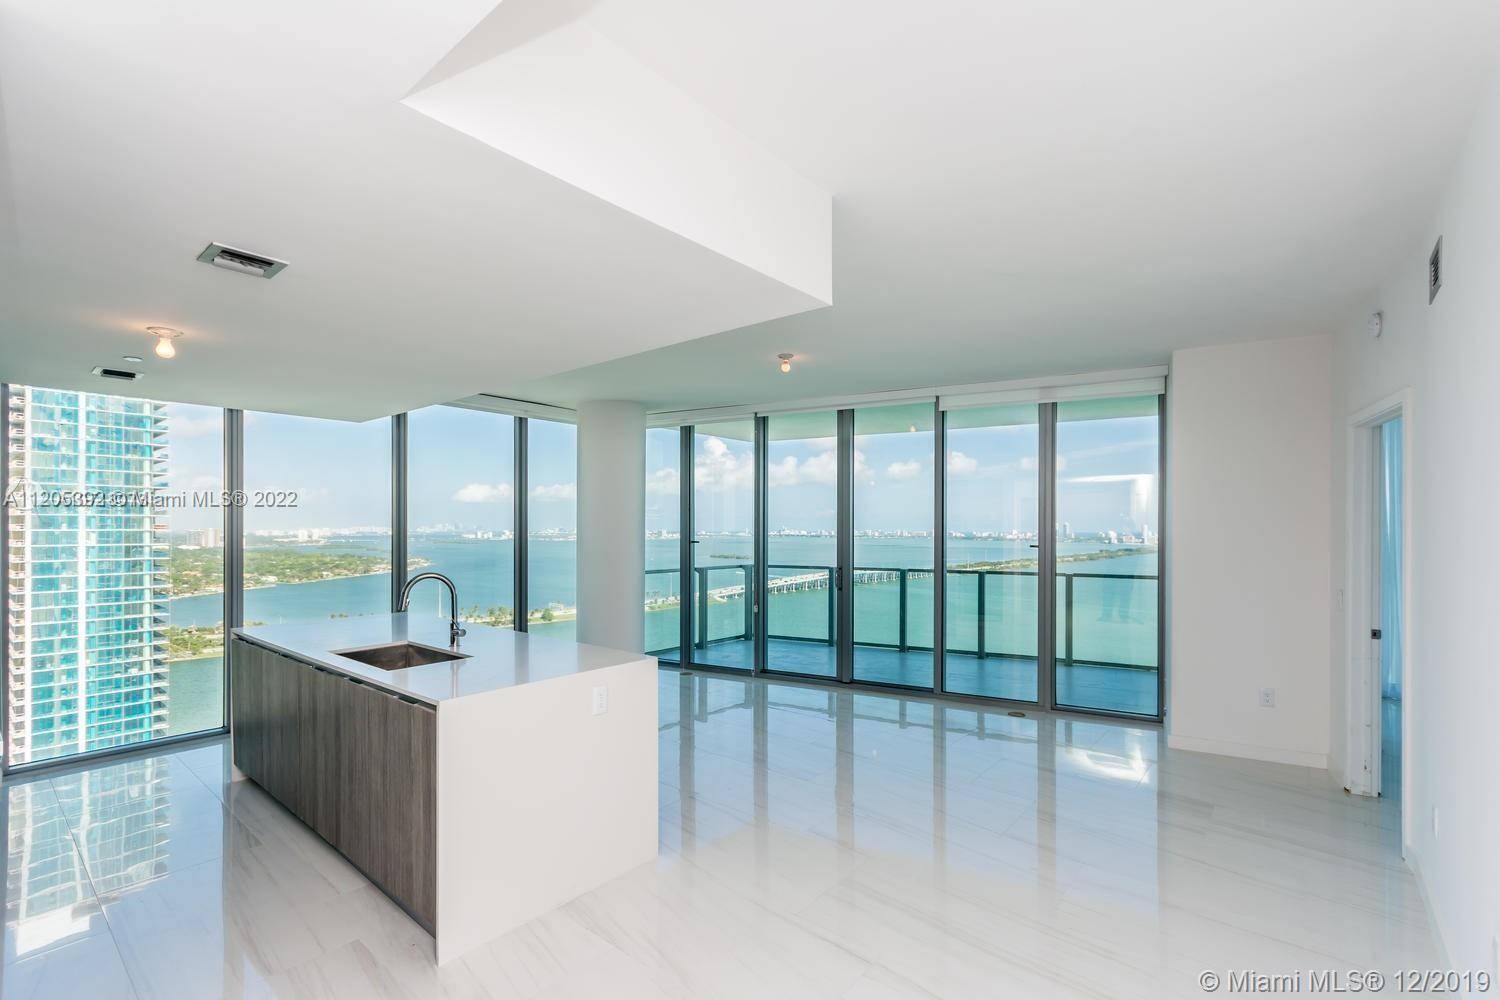 Edgewater, Miami | 3-Bed+Den, 4-Bath Residence with Breathtaking Bay Views